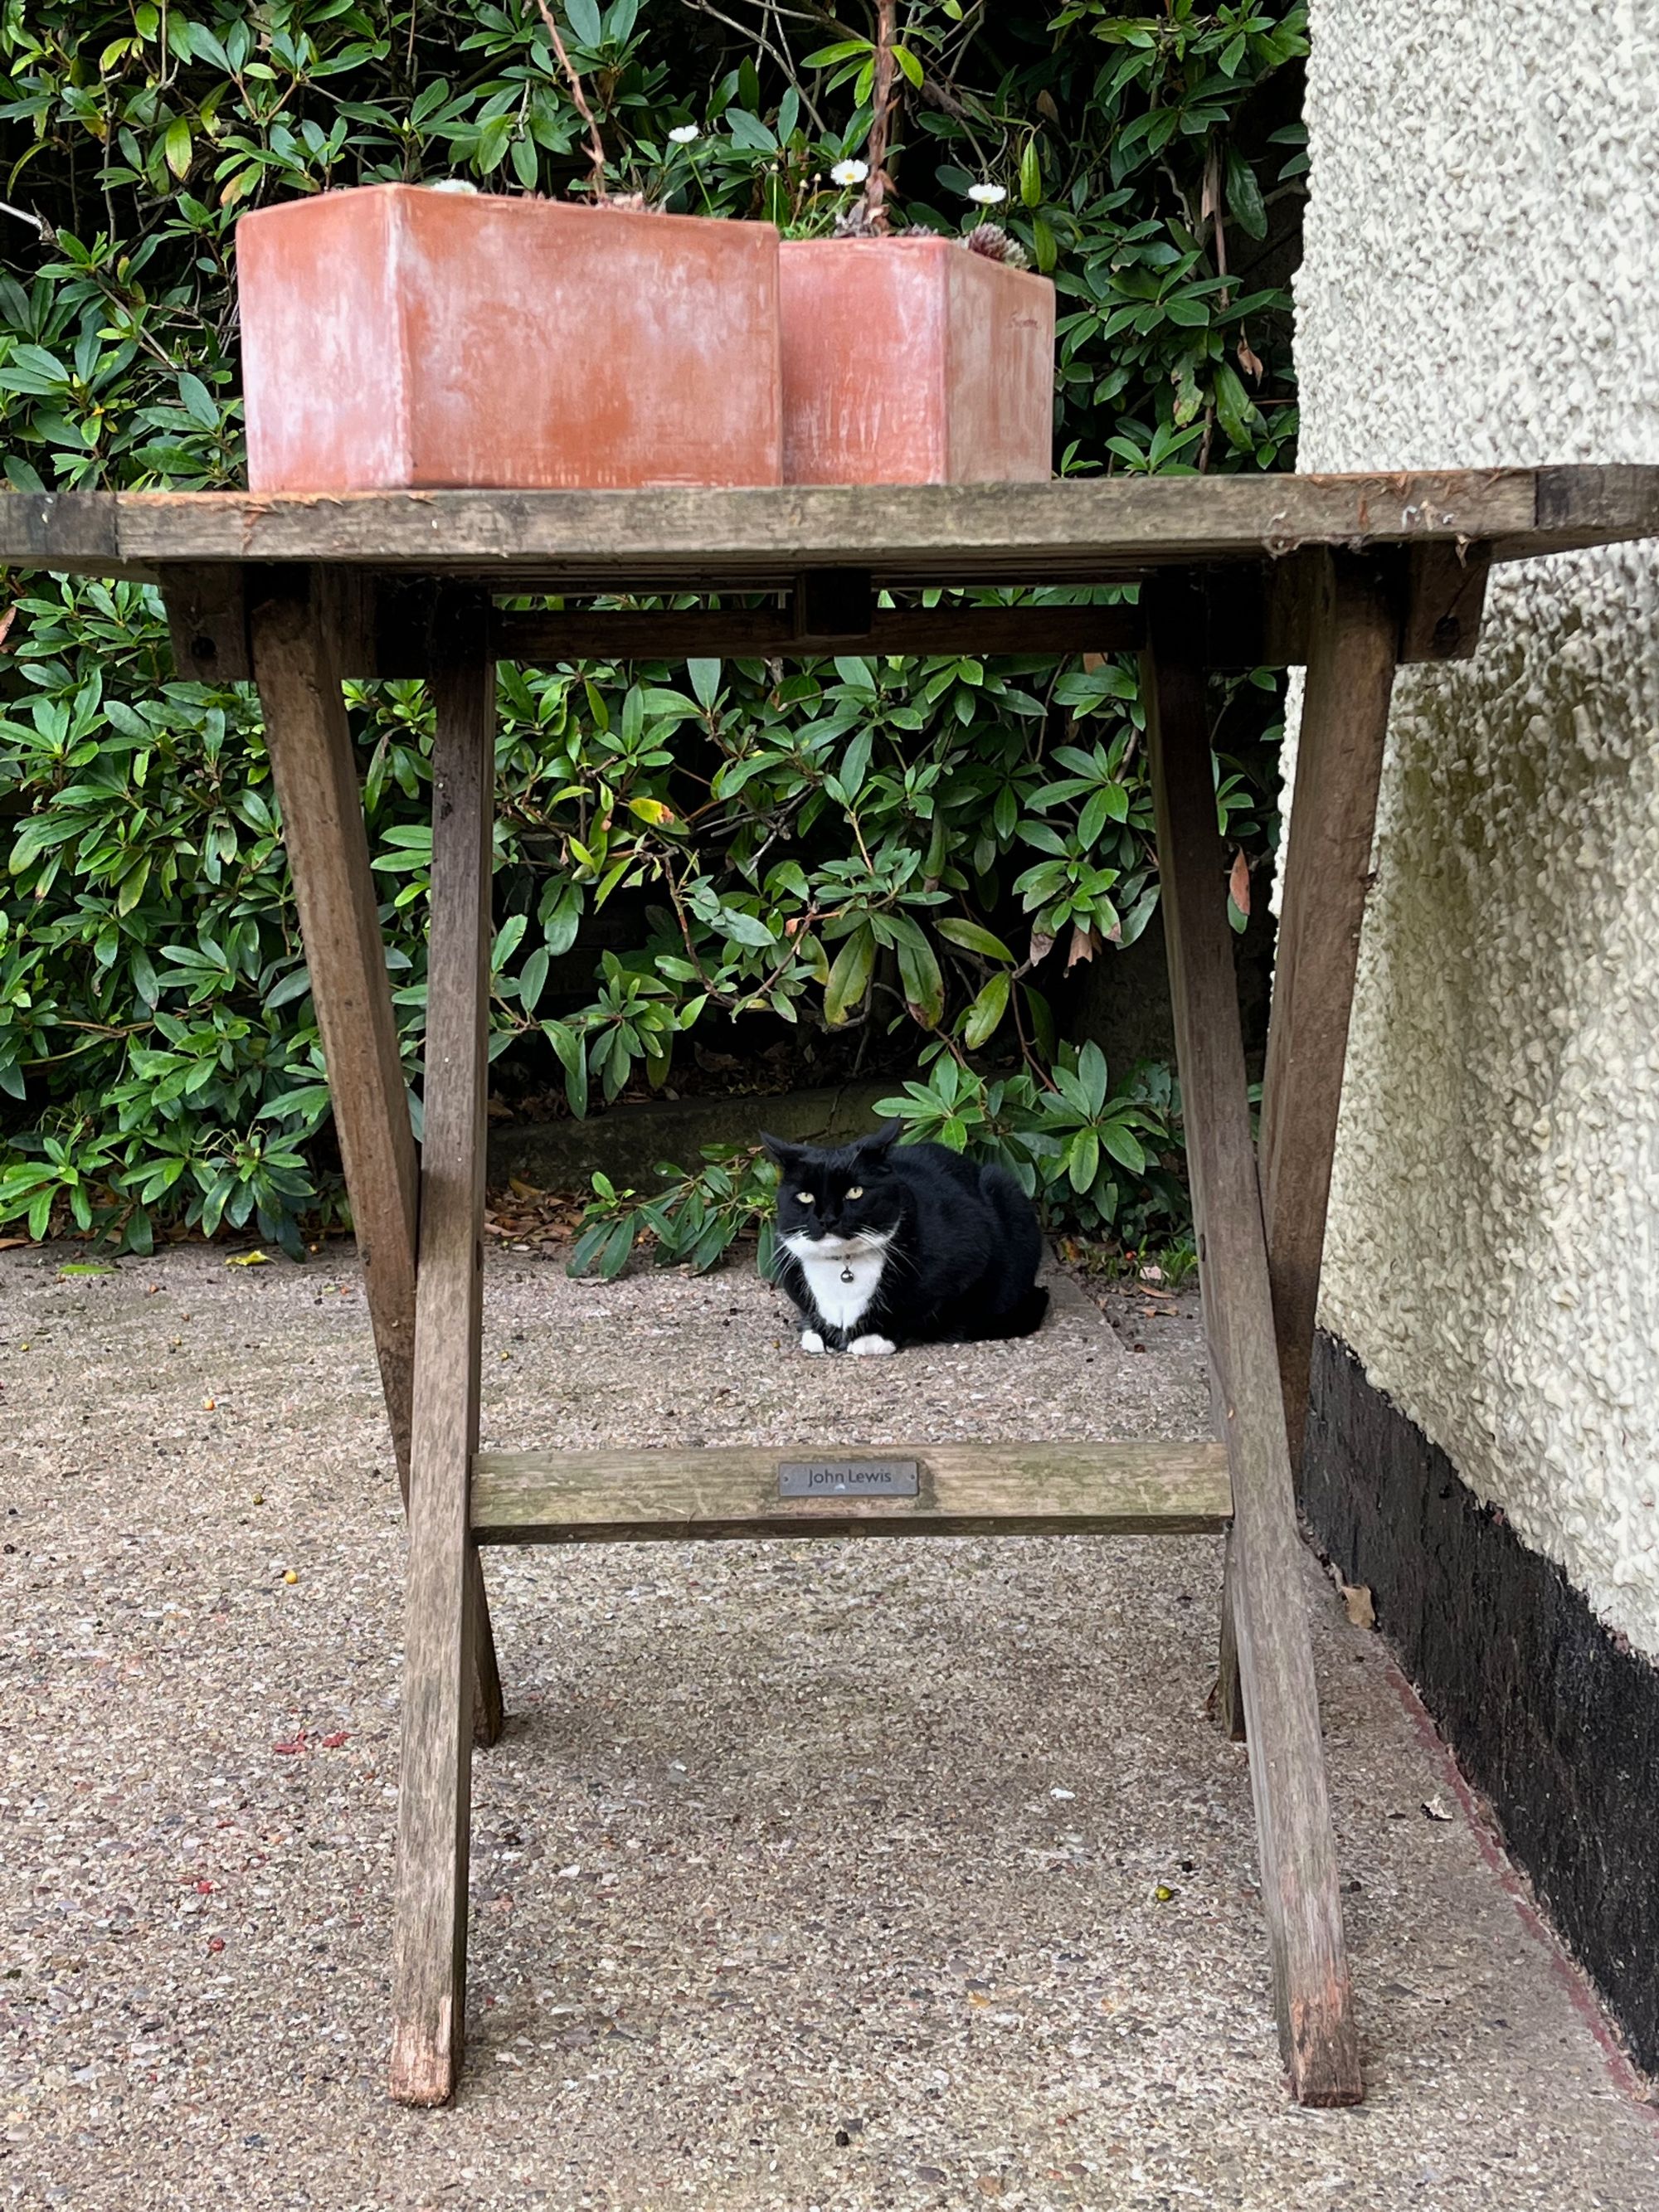 A black and white cat is sitting under a wooden table with plant pots on it